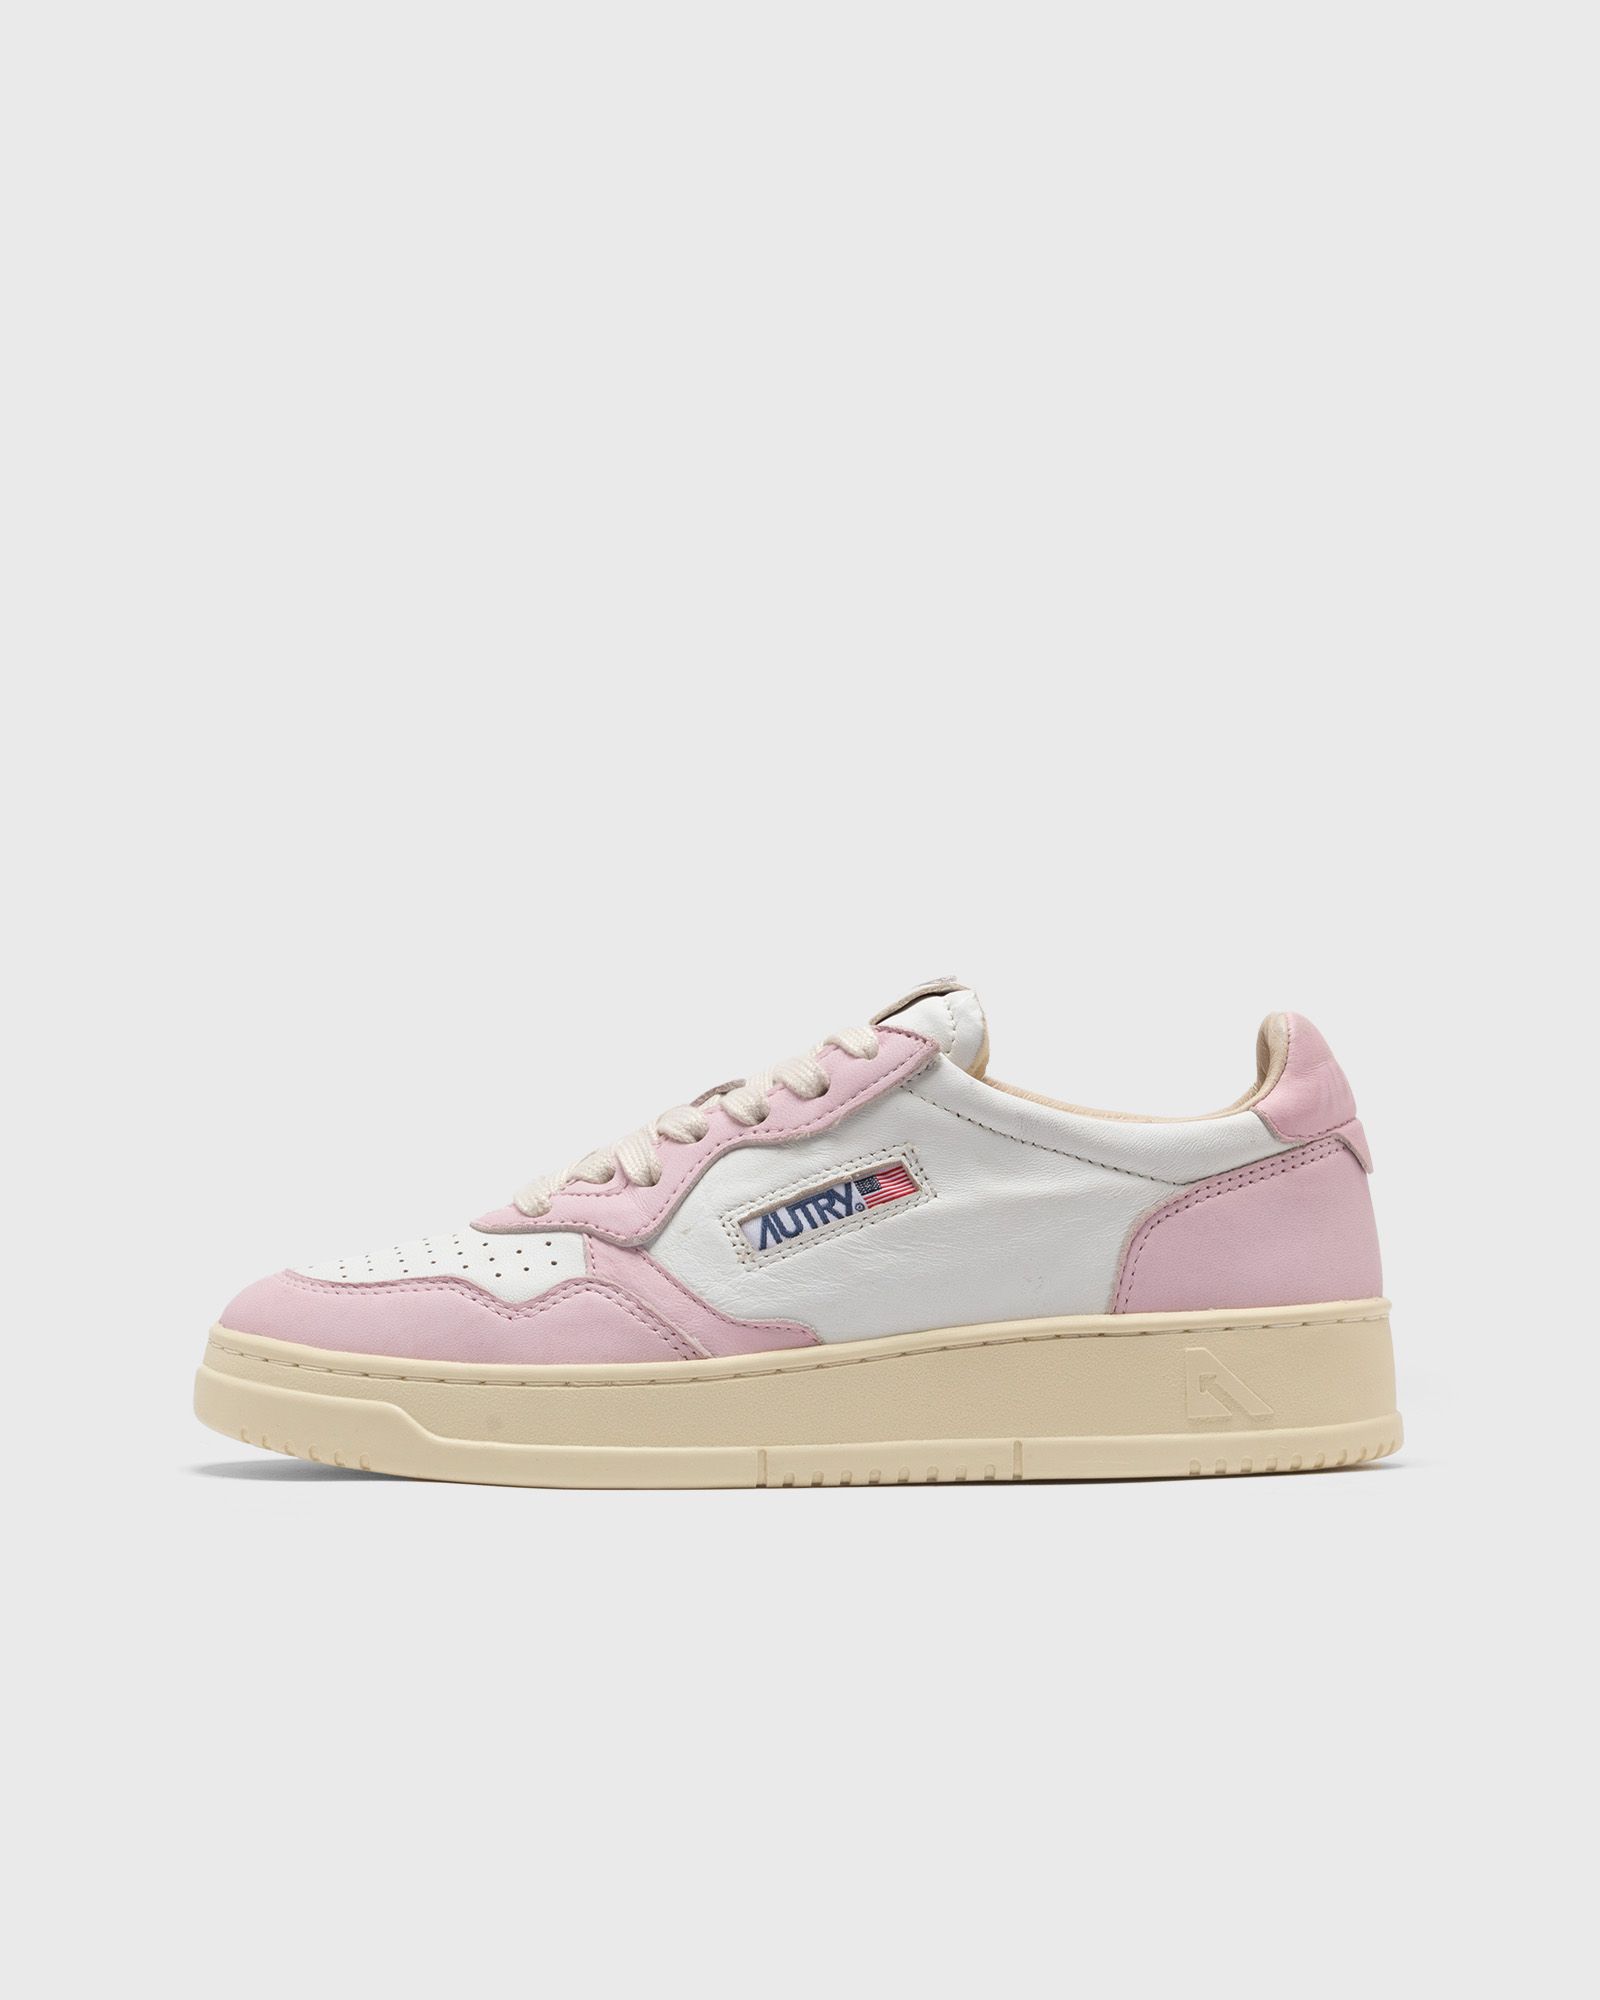 Autry Action Shoes WMNS MEDALIST LOW women Lowtop pink|white in Größe:36 von Autry Action Shoes